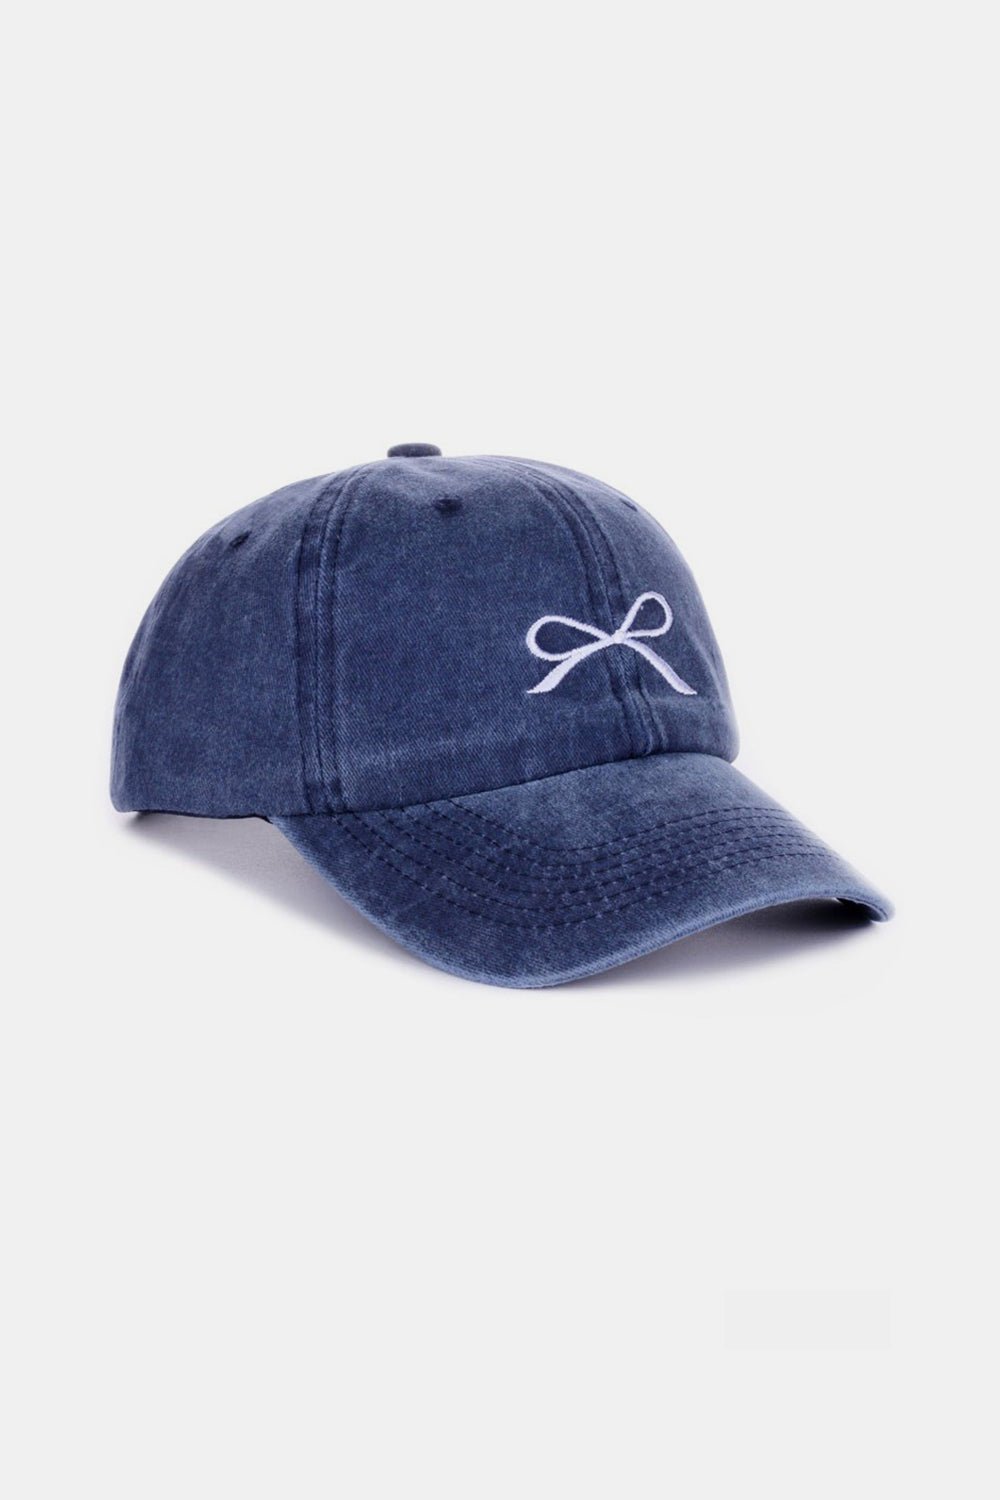 Zenana Bow Embroidered Washed Cotton Caps - Happily Ever Atchison Shop Co.